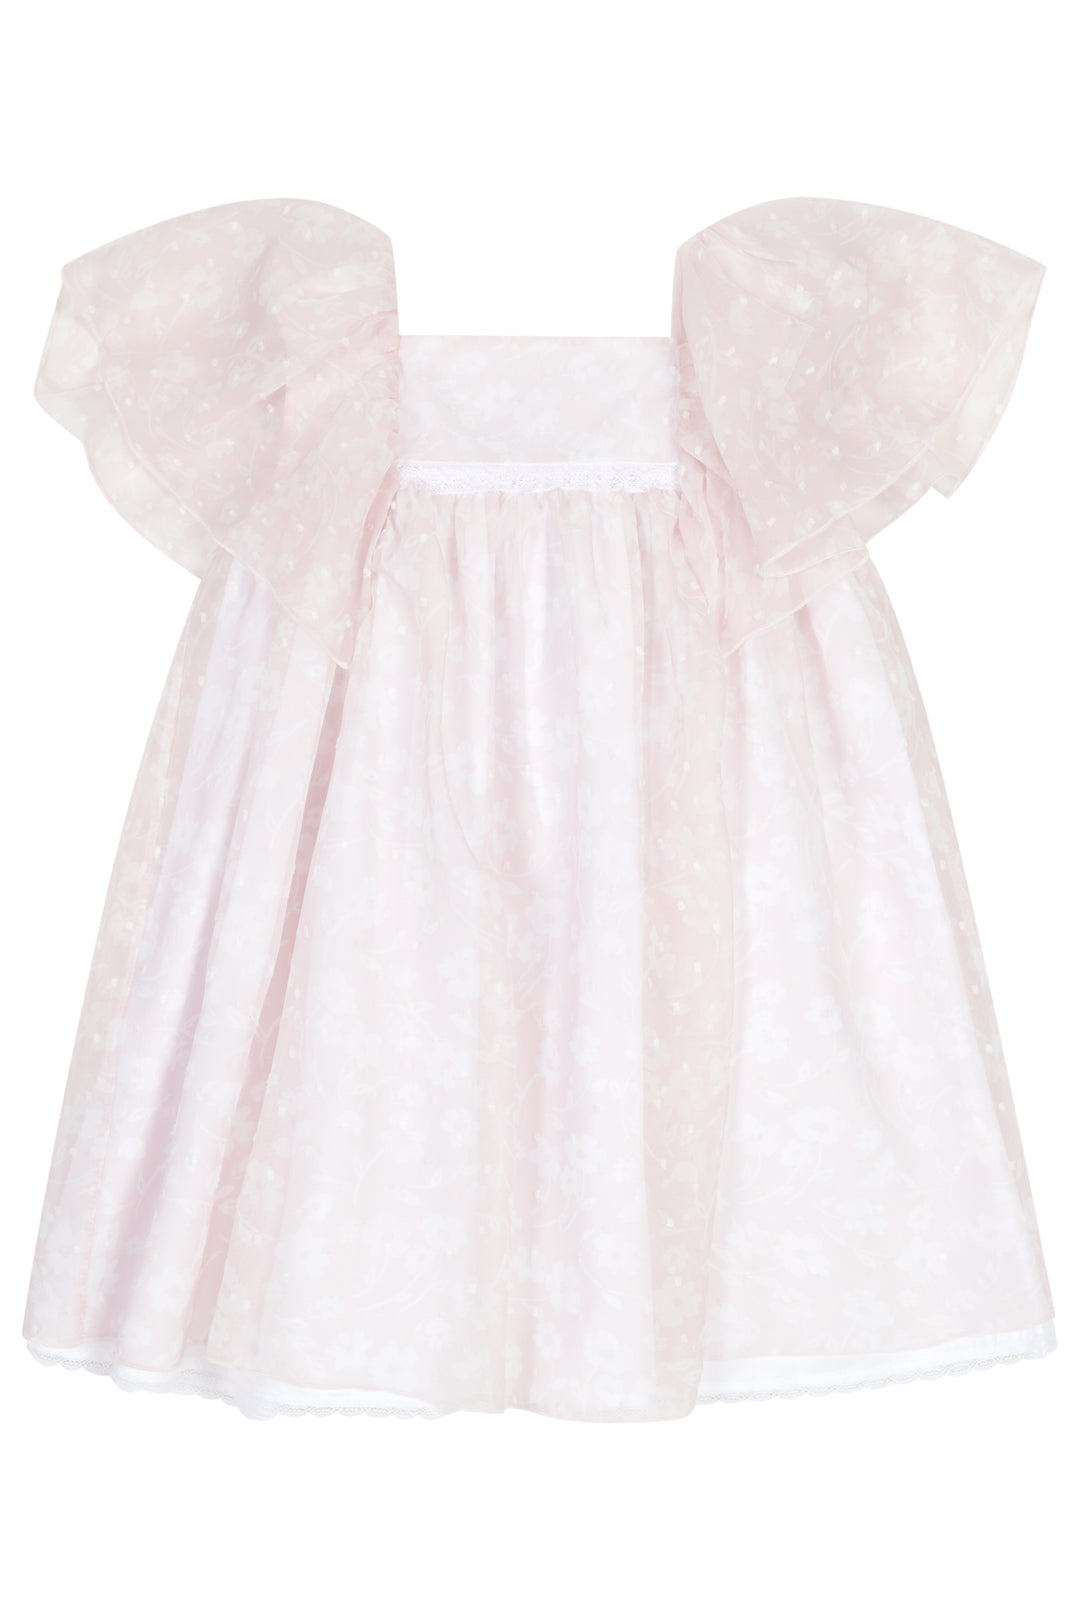 Chic by Deolinda PREORDER "Calista" Pale Pink Floral Tulle Dress | Millie and John